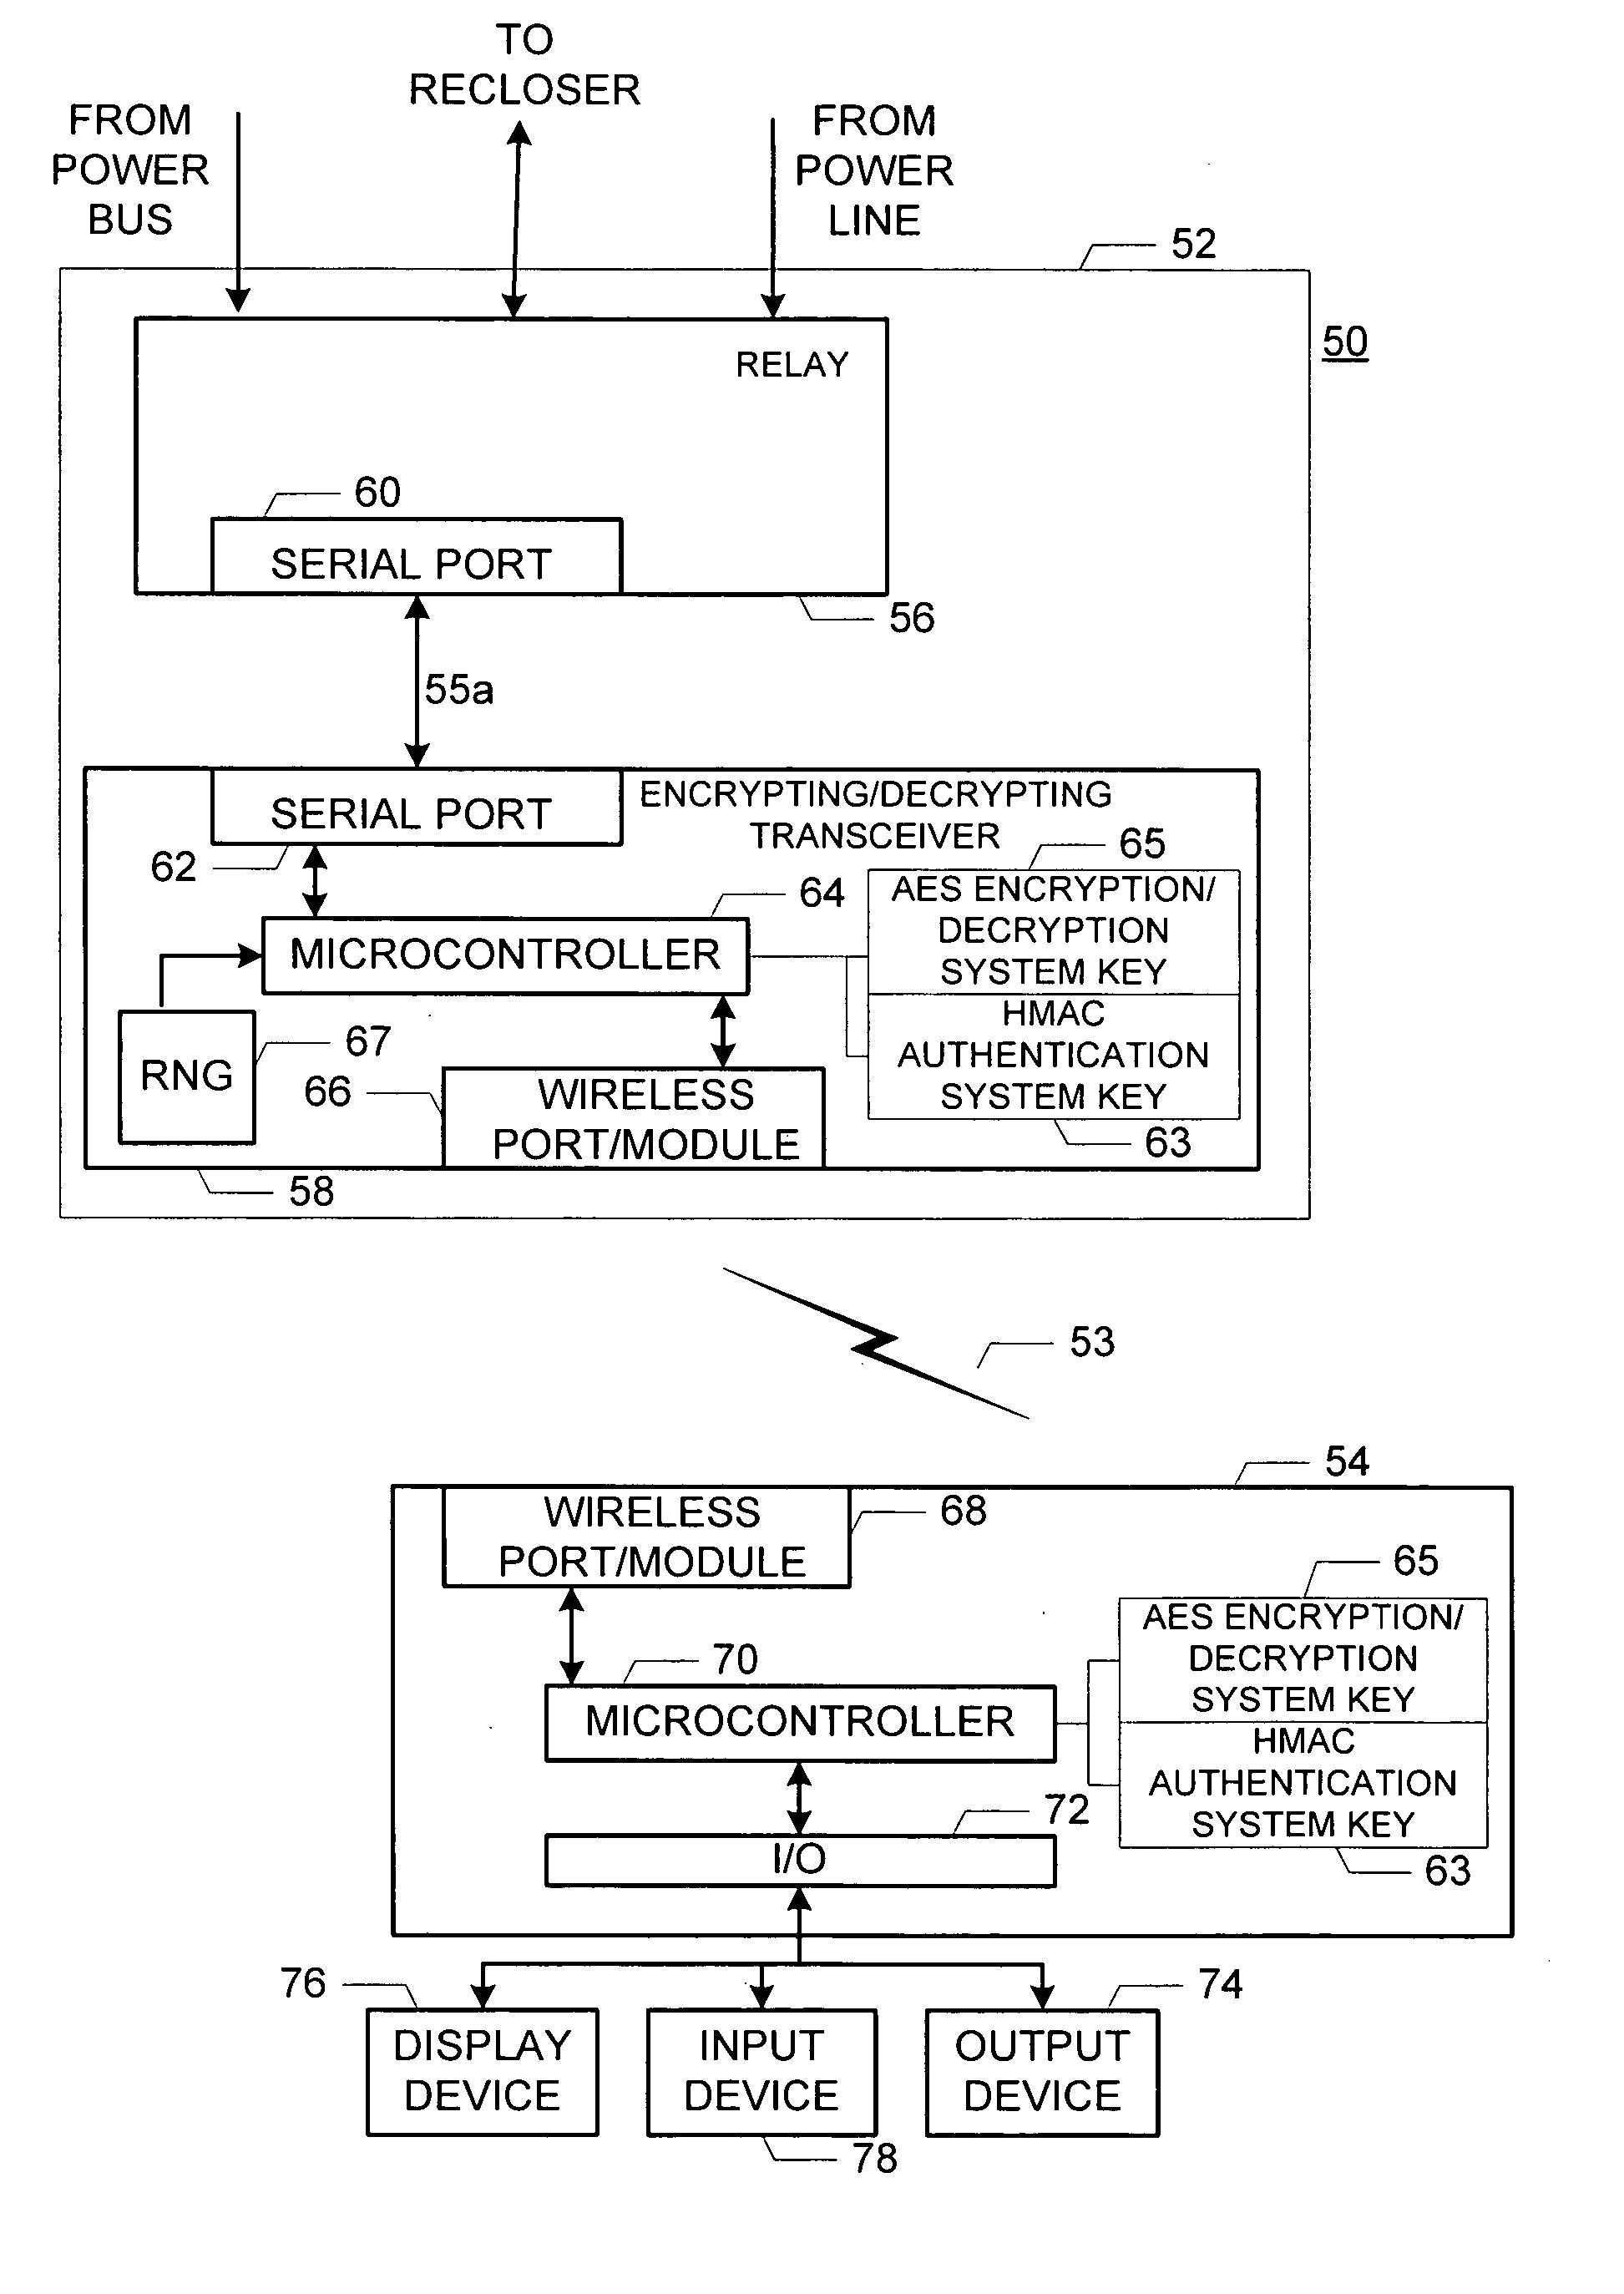 System and method for converting serial data into secure data packets configured for wireless transmission in a power system